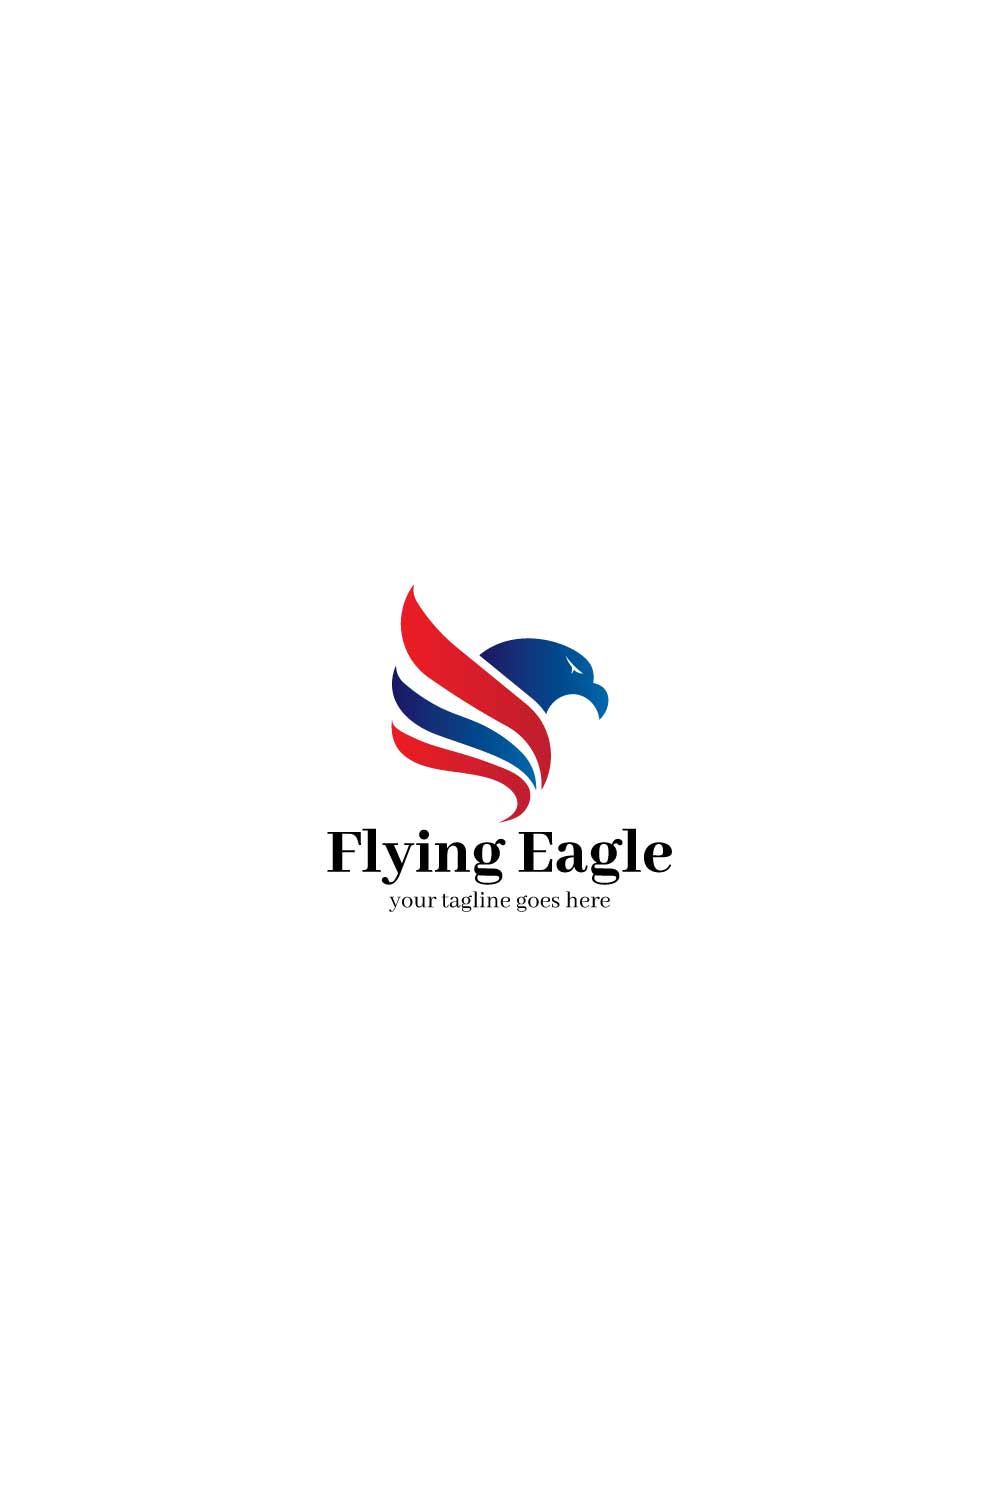 flying eagle logo vector illustration in white background isolated pinterest preview image.